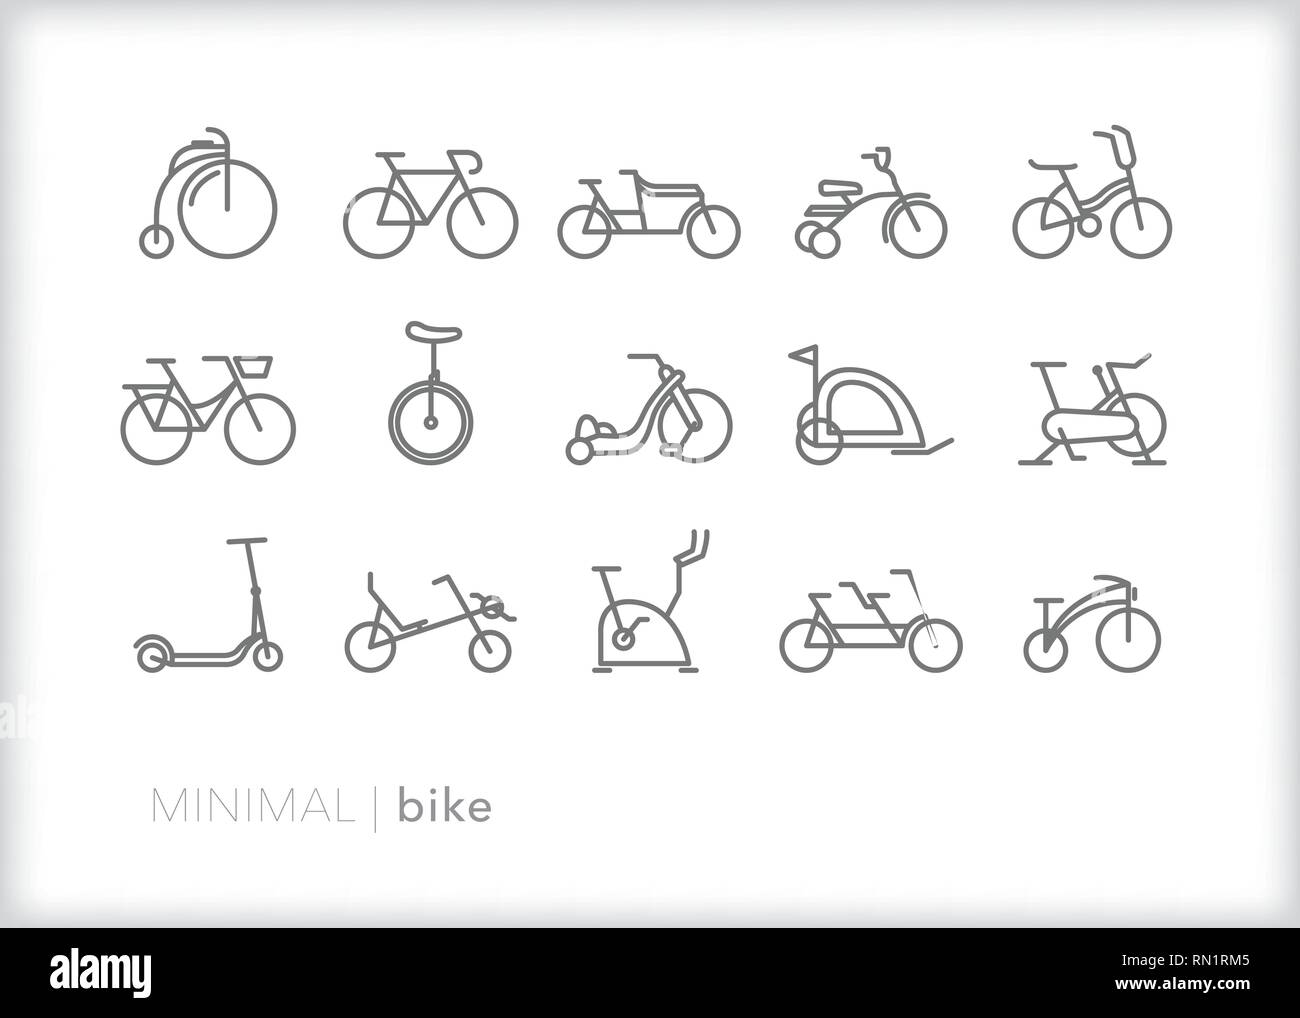 Set of 15 bike line icons showing various types of bicycles including old fashioned, cruiser, exercise, tandem, recumbent, tricycle, and unicycle Stock Vector